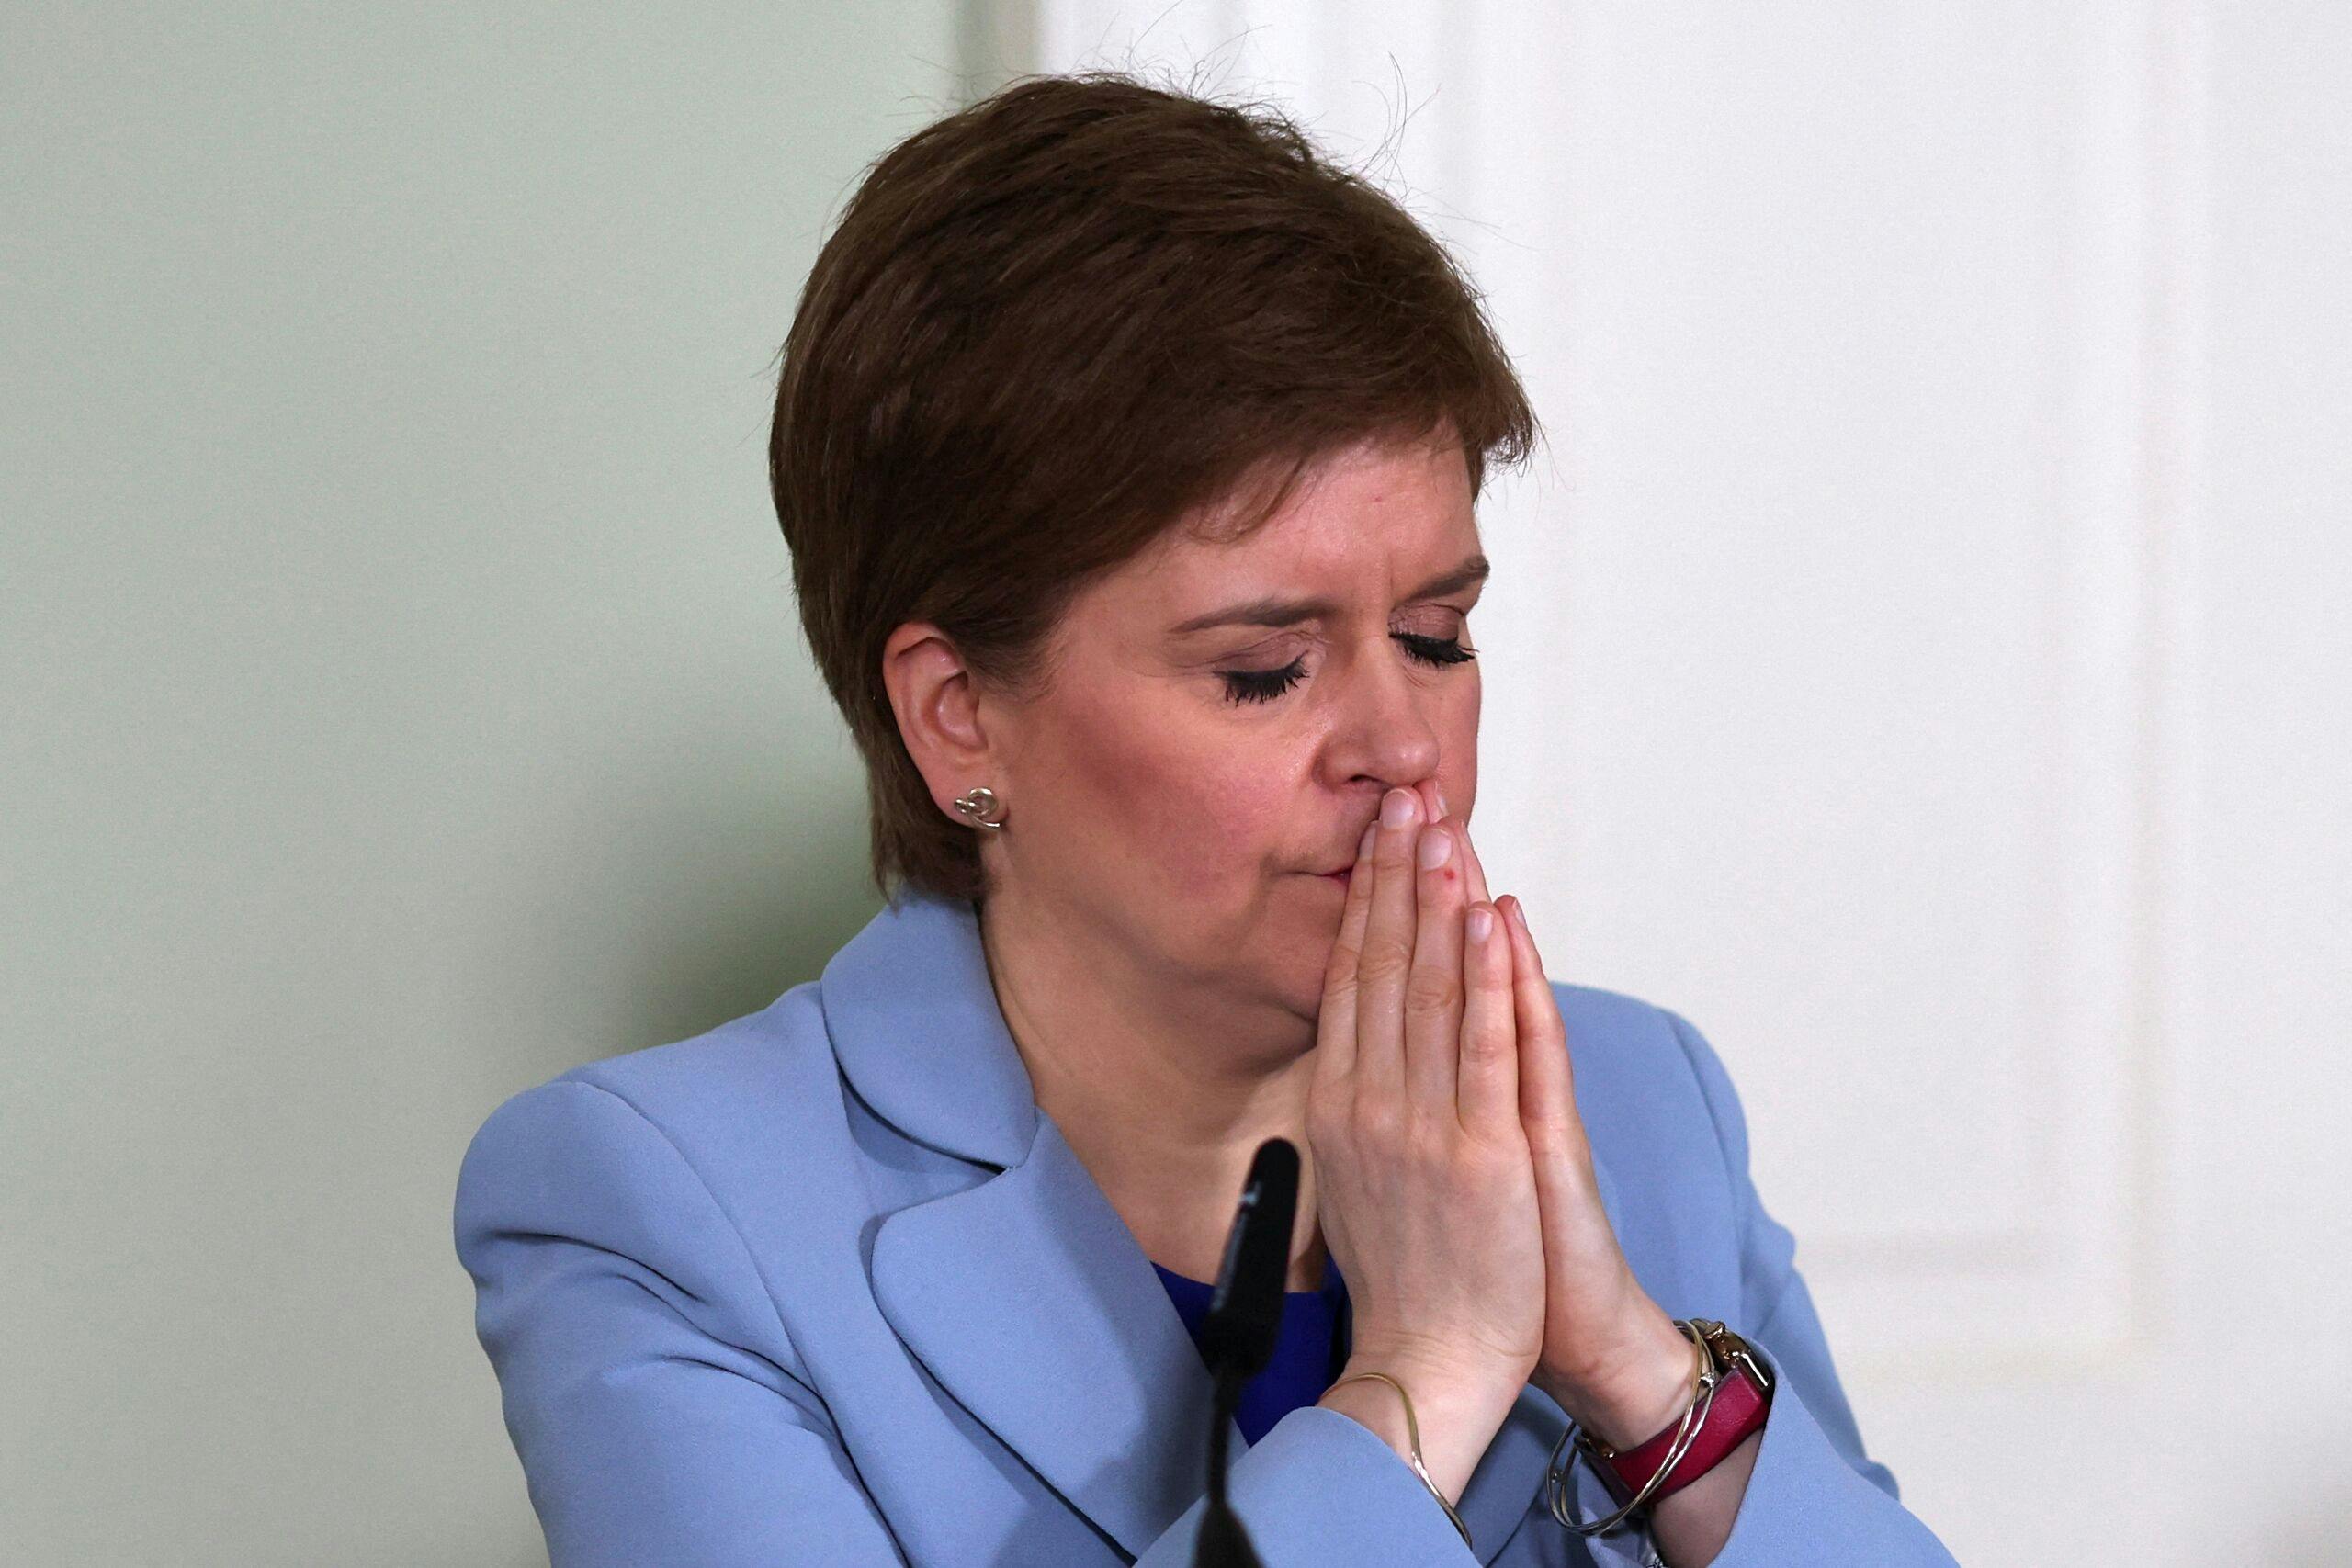 Scotland wants to force an independence referendum if necessary